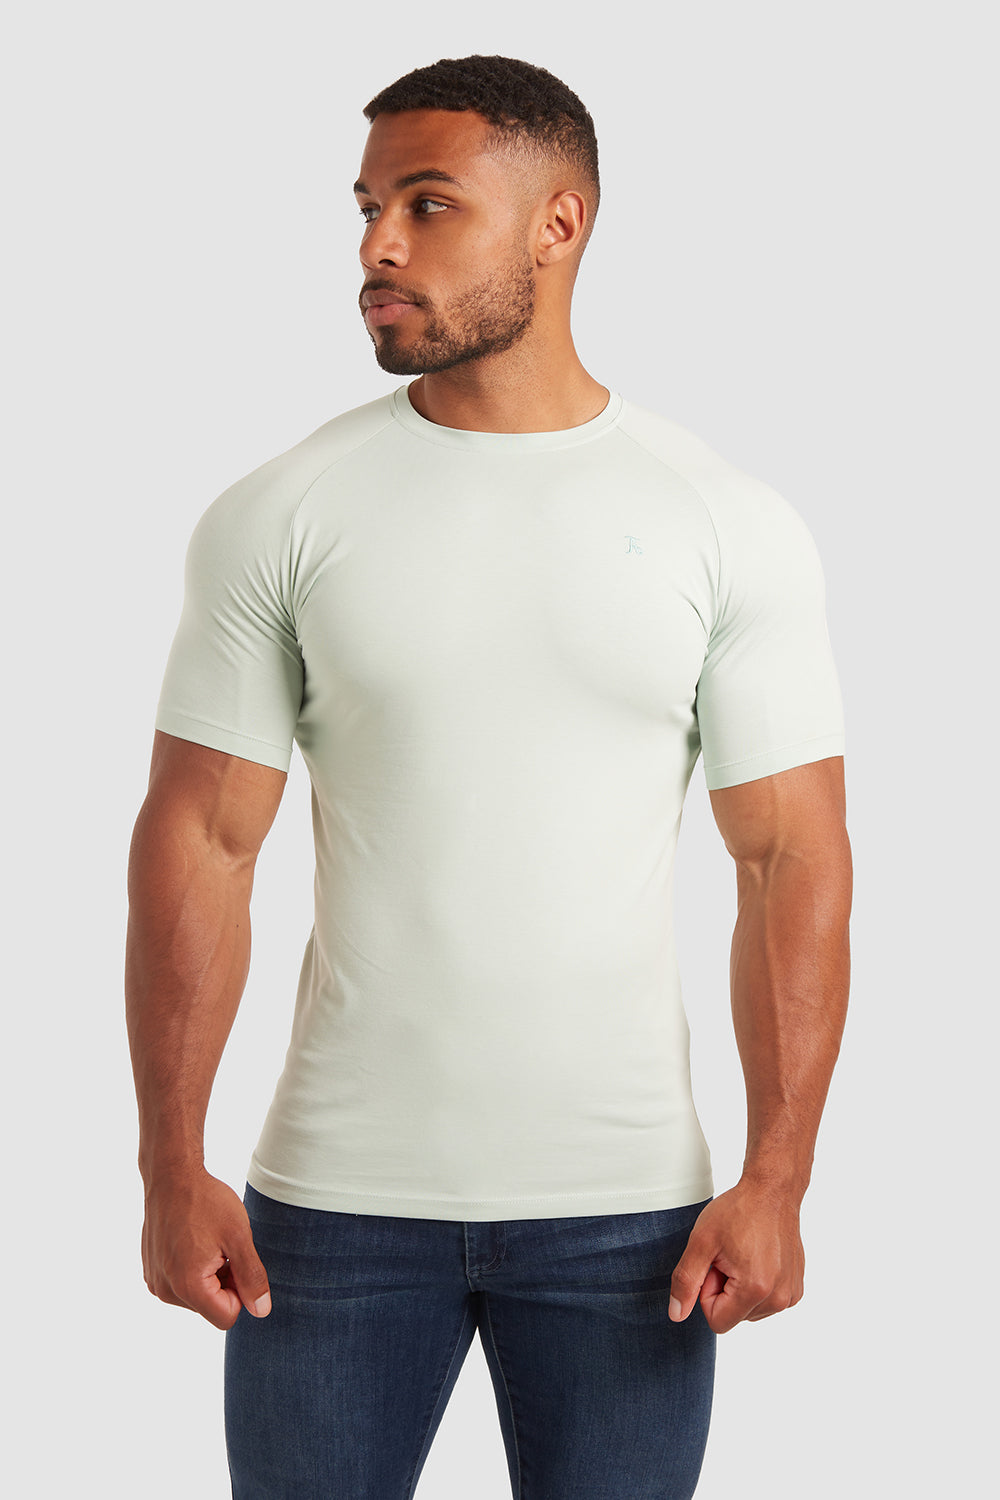 Athletic Fit T-Shirt in Pistachio - TAILORED ATHLETE - USA